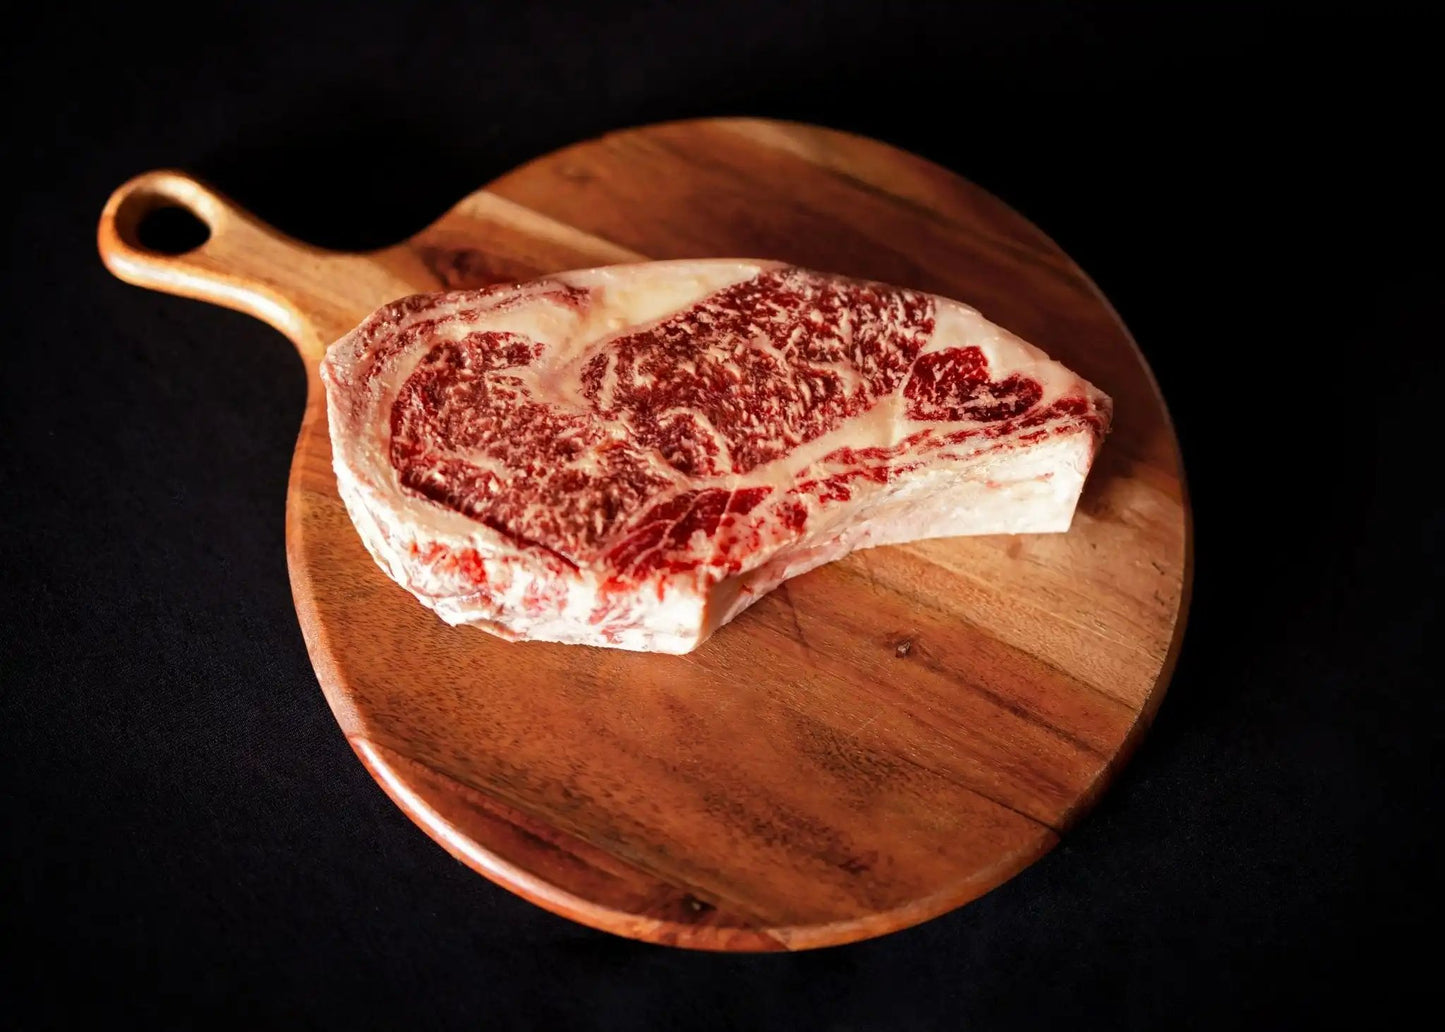 Grass-Fed Pasture-Raised Wagyu or Angus 1/16th Beef Box - 25lbs of Beef - The Hufeisen-Ranch (WYO Wagyu)